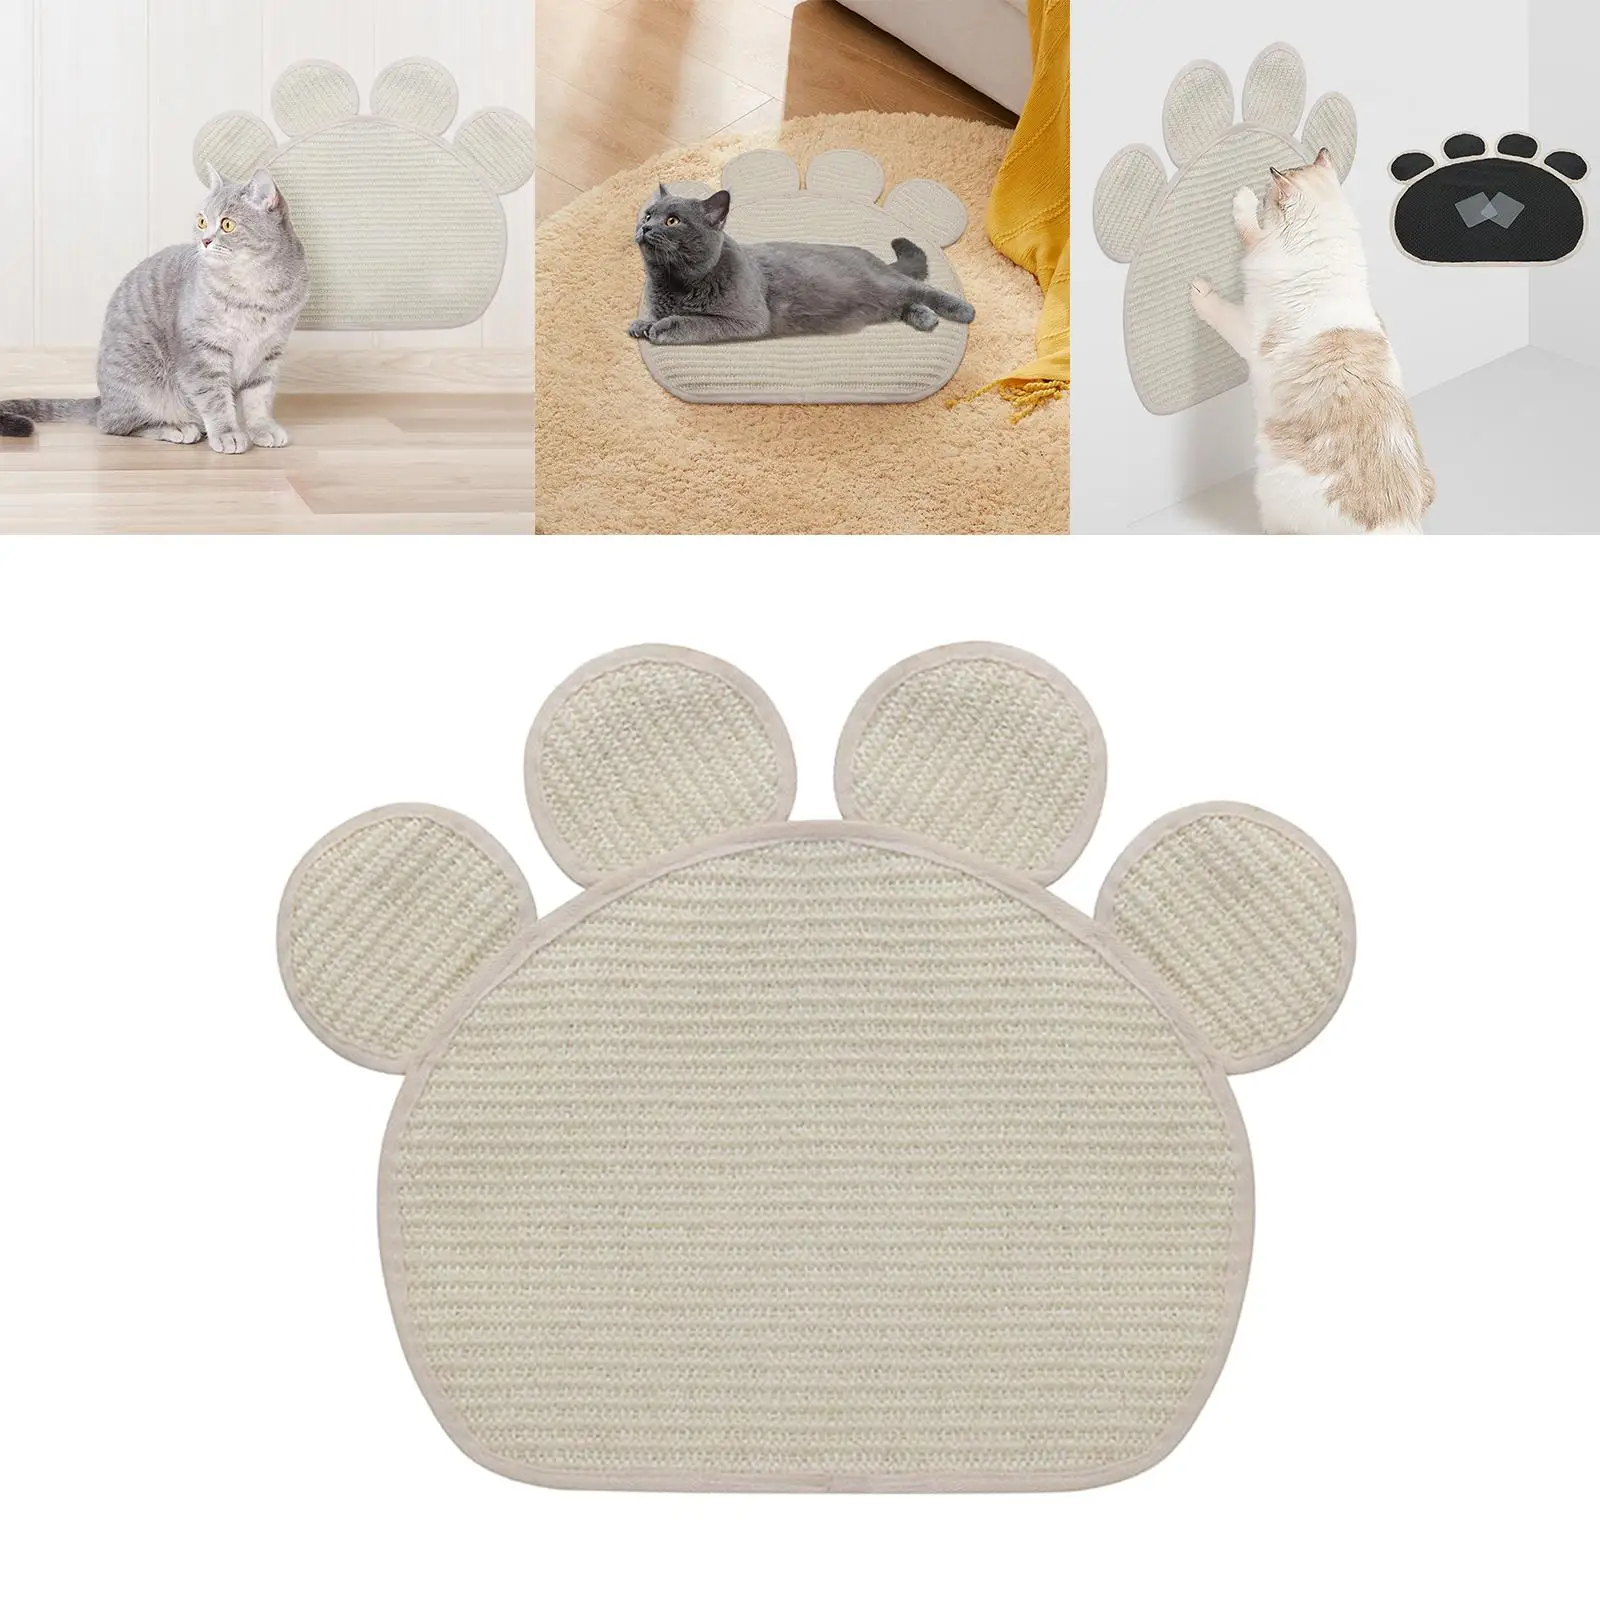 Cat Scratcher Mat Horizontal Anti Slip Protecting Kitty Scratching Pad Cat Scratch Rug Carpet for Chair Sofa Couch Floor Wall